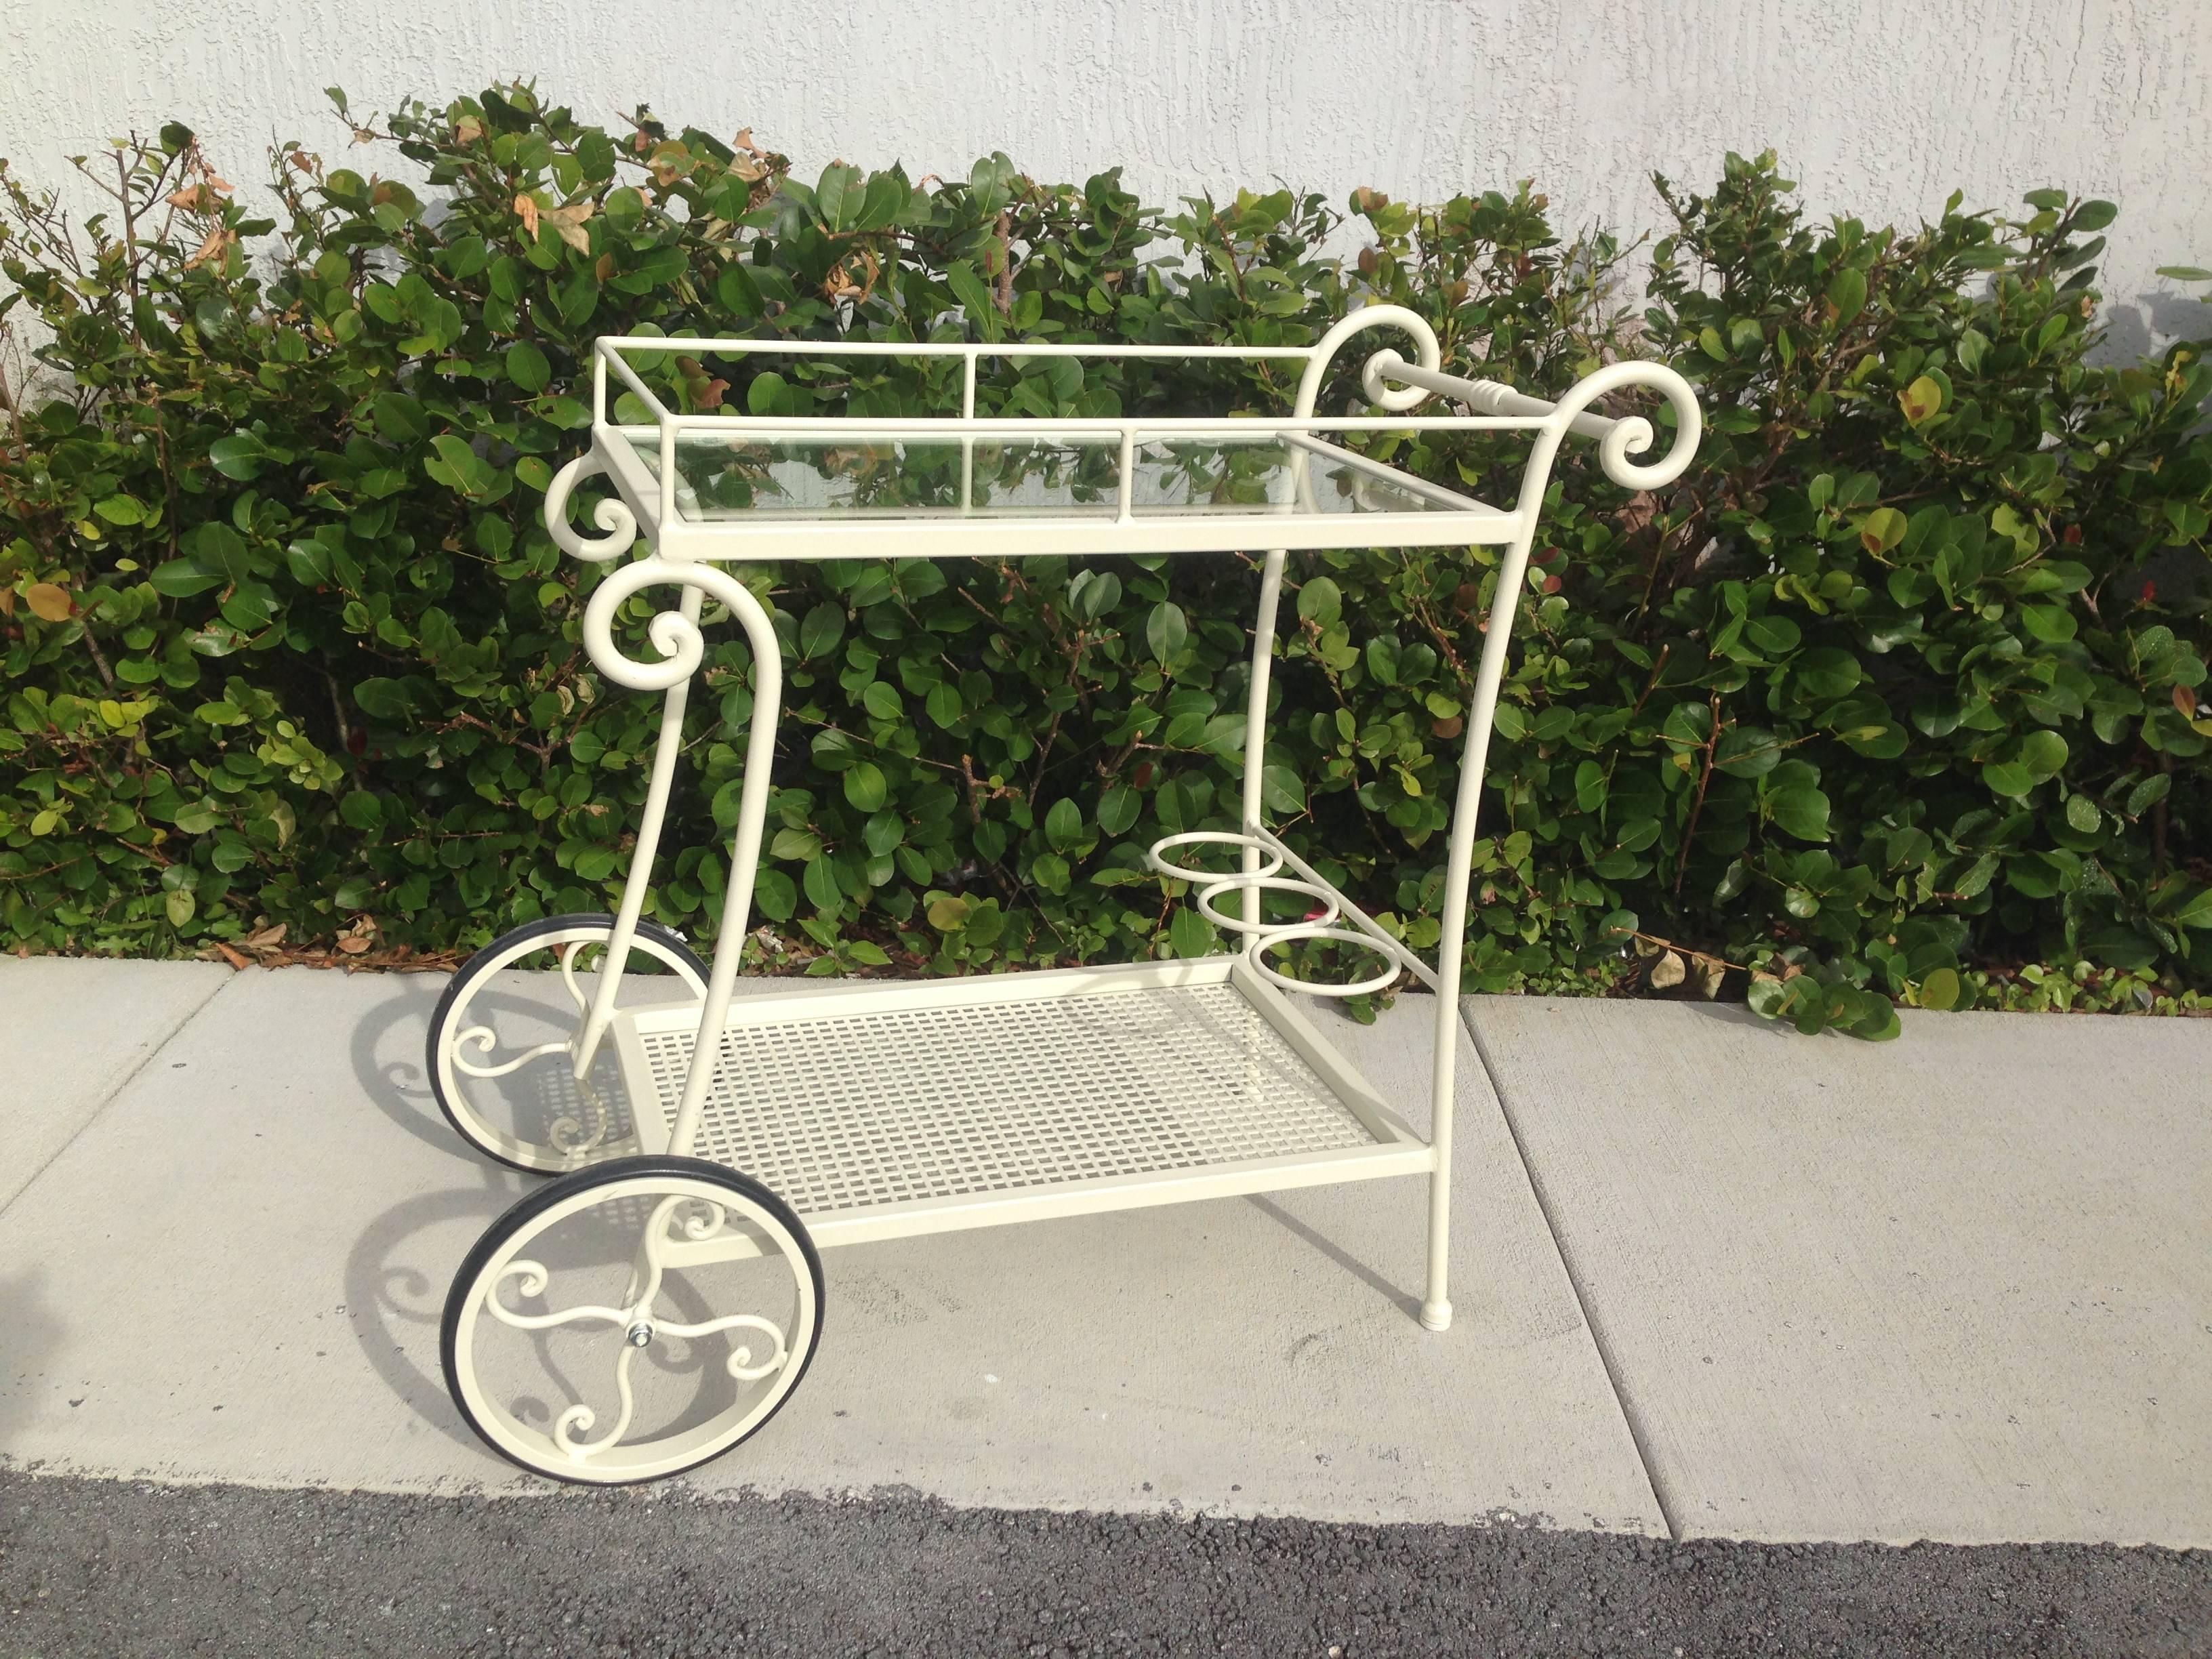 Wrought iron tea cart.
Perfect for a collected garden of potted plants, or extra kitchen storage, this wrought iron tea cart is finished in a fresh white color.